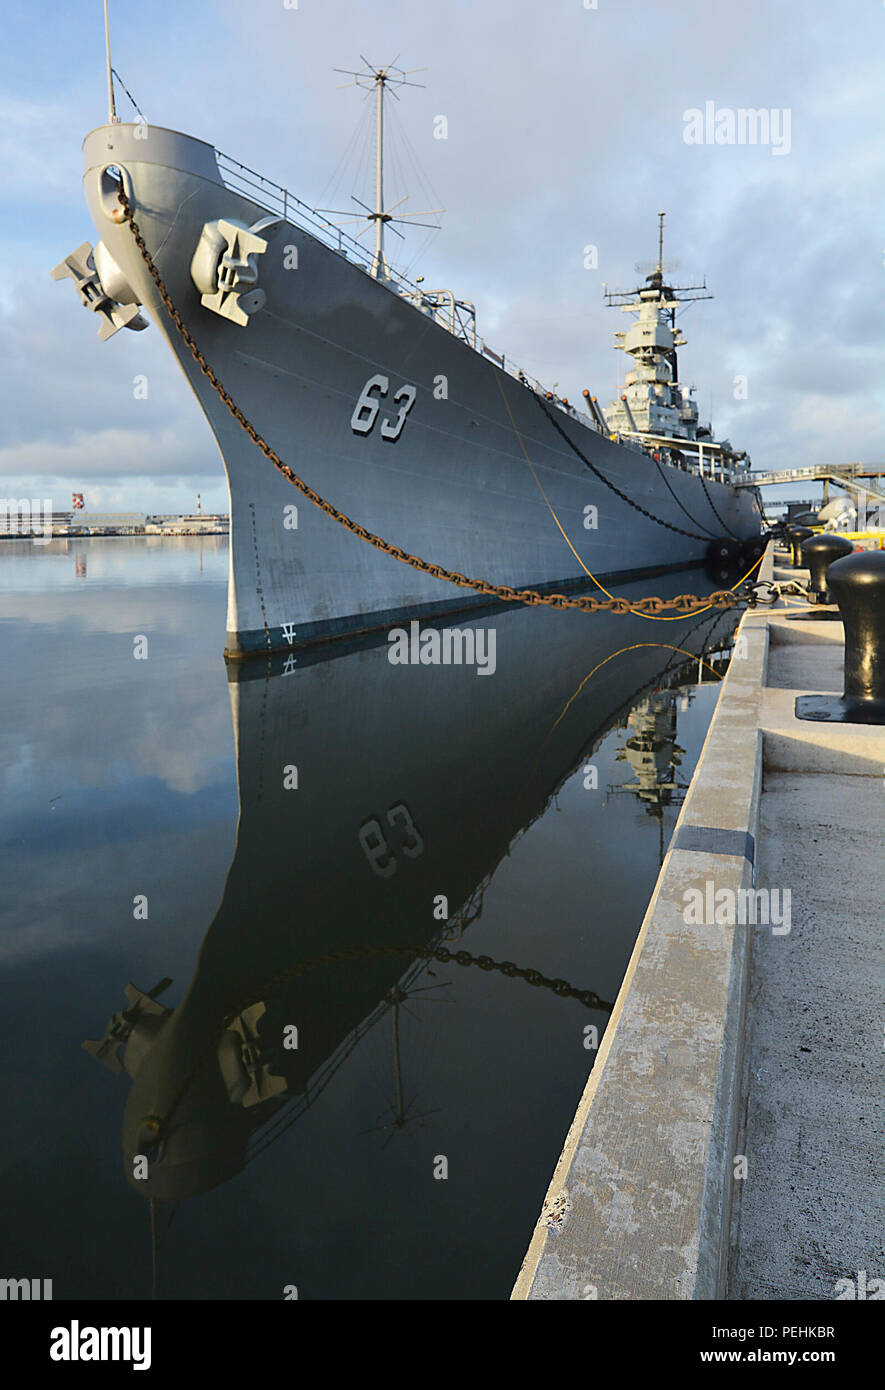 PEARL HARBOR (Aug. 25, 2015) The Battleship Missouri Memorial caught in the early morning light berth on Ford Island at Joint Base Pearl Harbor-Hickam, Aug 25. (U.S. Navy photo by Mass Communication Specialist 1st Class Meranda Keller/Released) Stock Photo